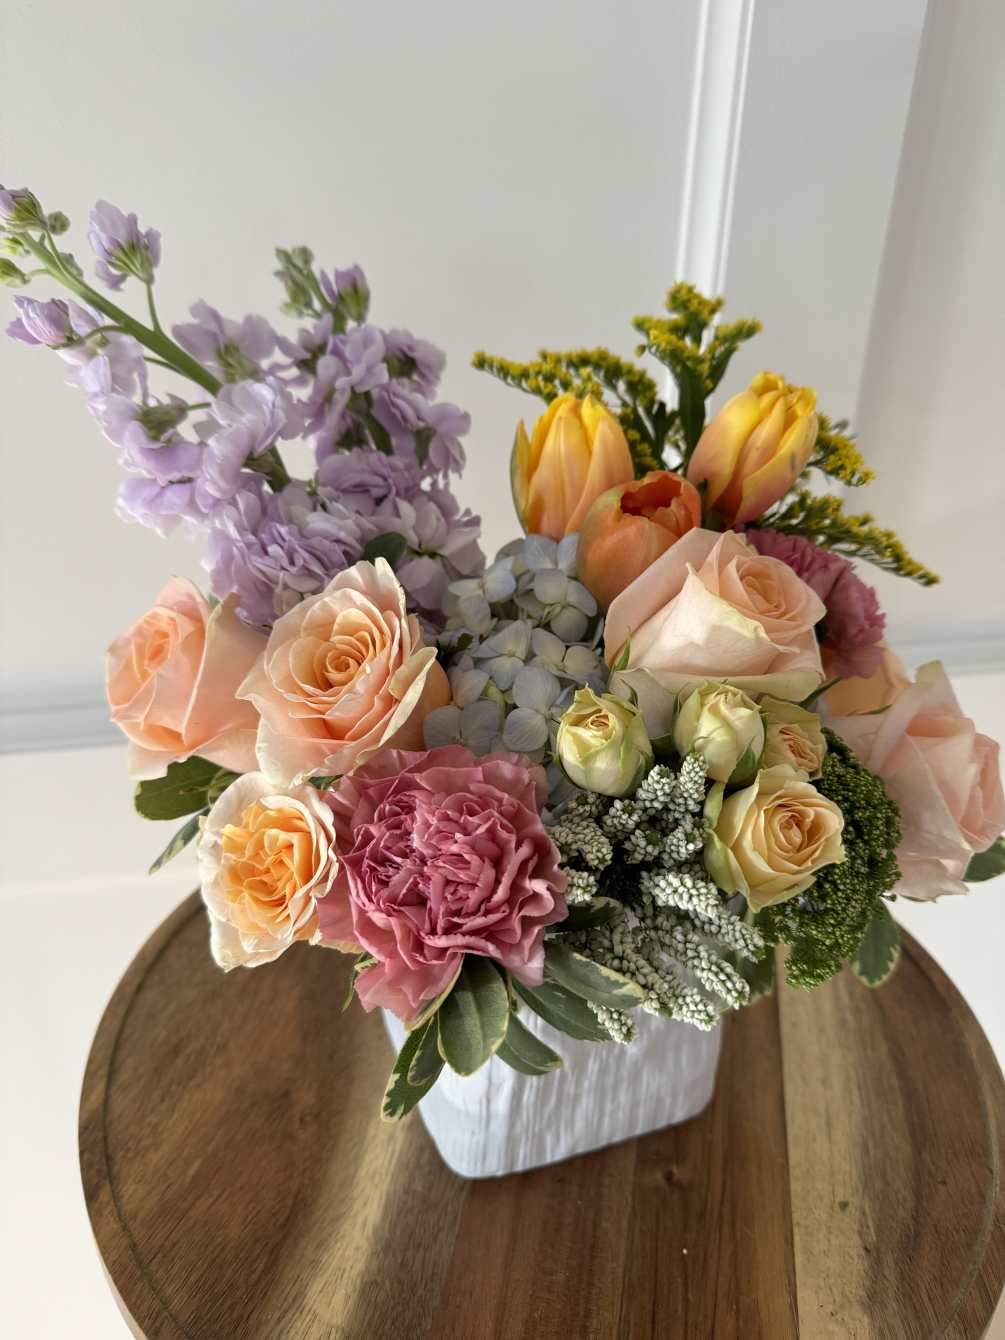 A fresh and colorful arrangement featuring stock, roses, tulips and more.